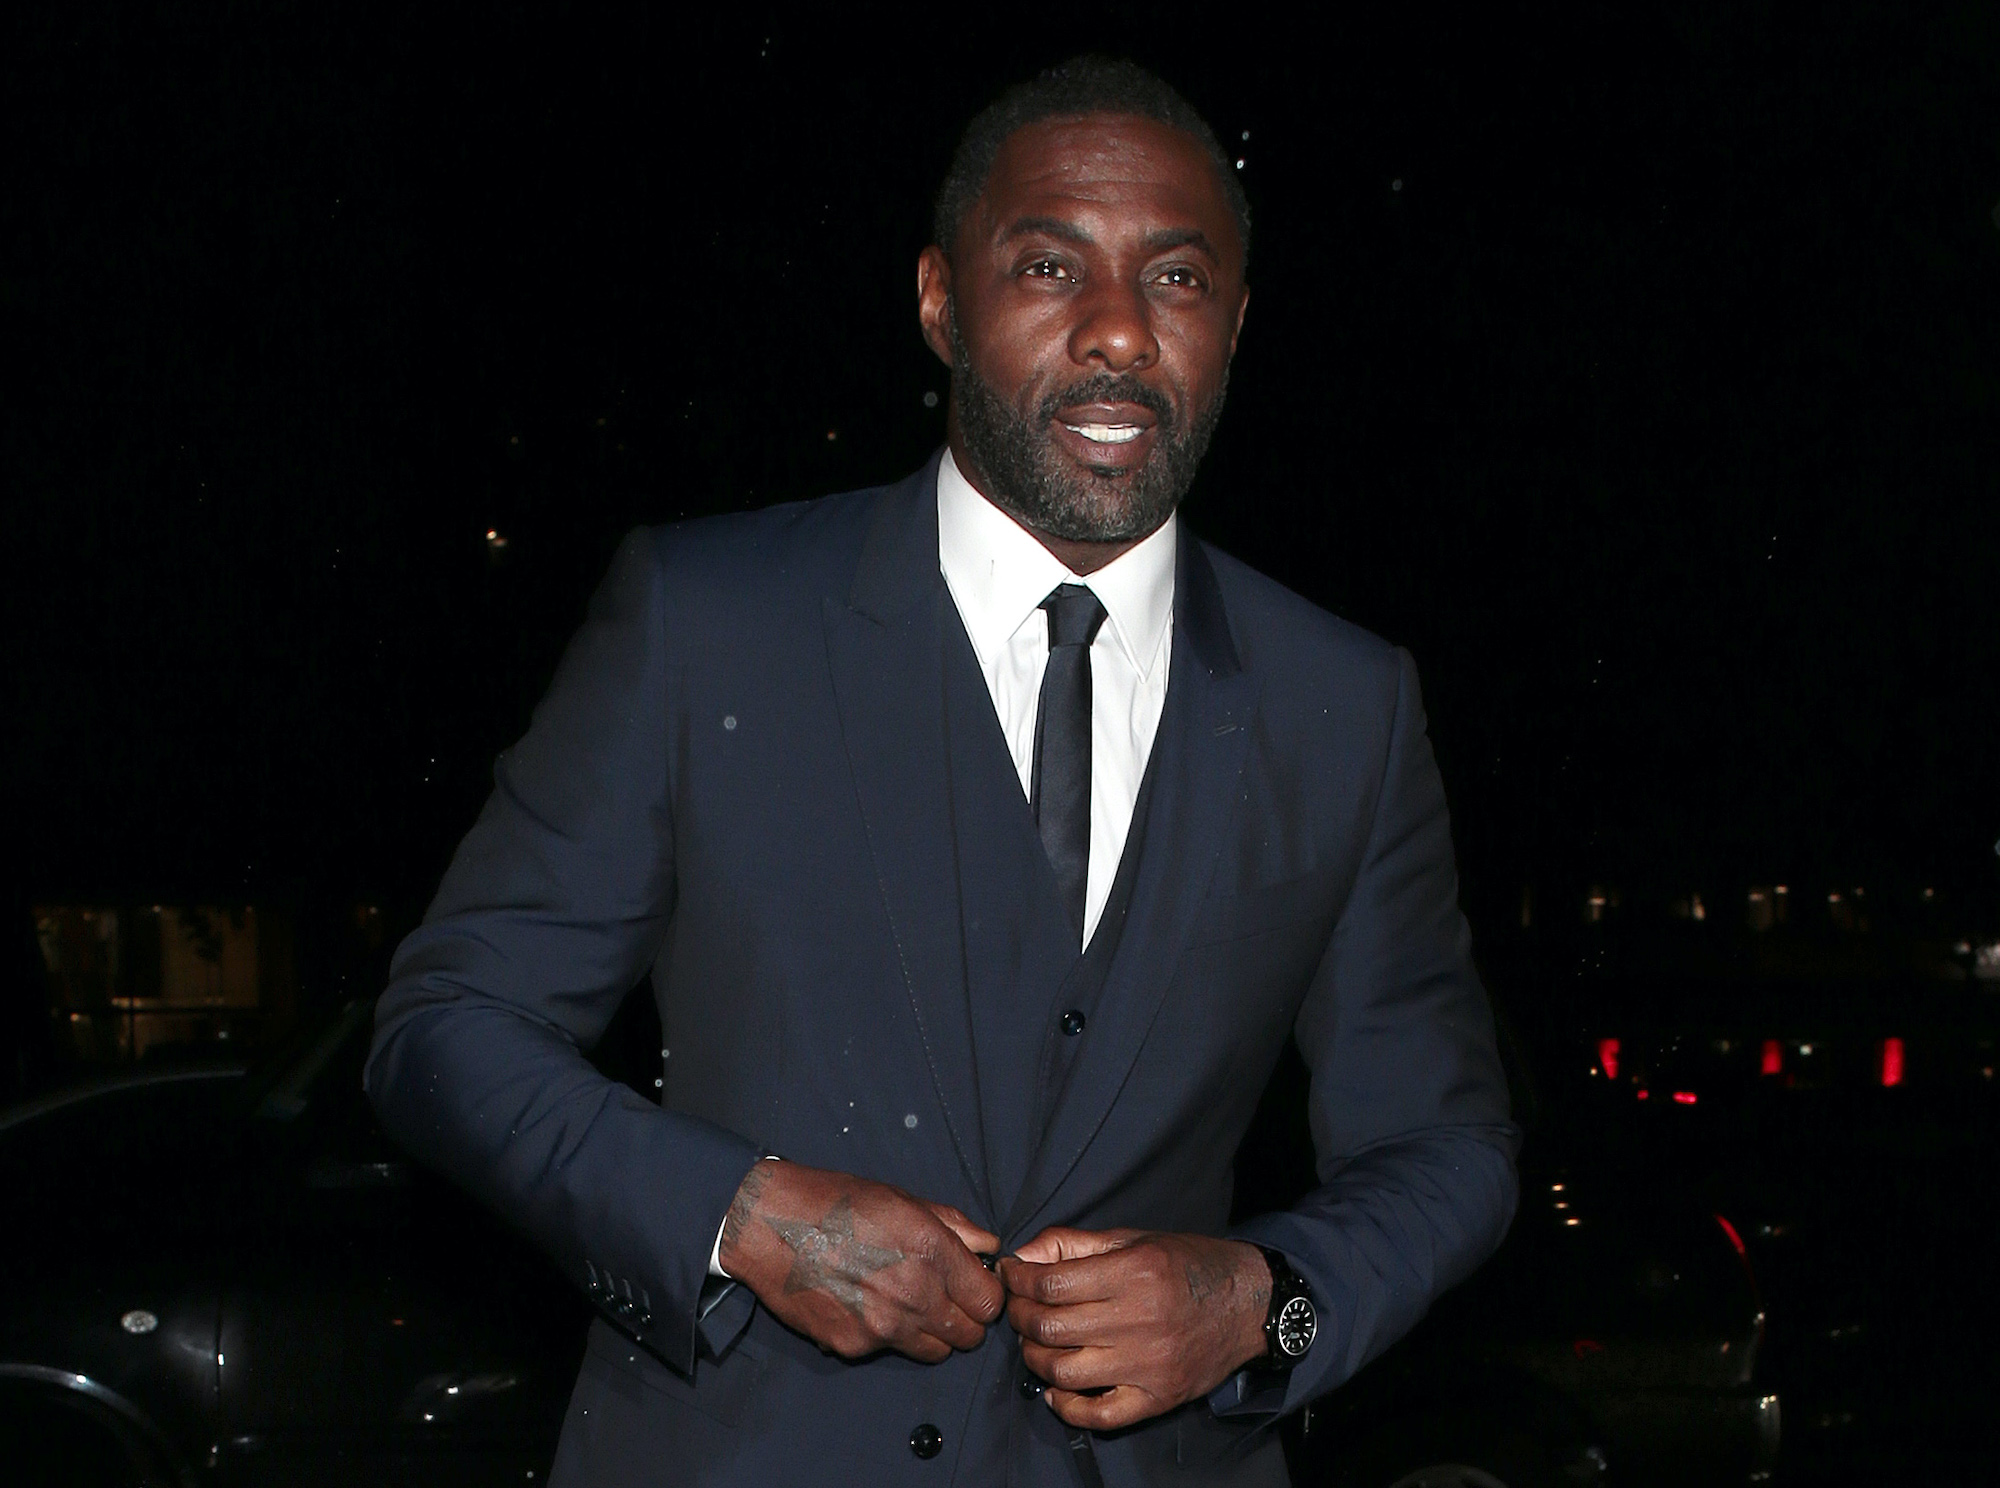 Idris Elba attending Bond: No Time To Die world premiere after parties on Sept. 28, 2021 in London. He walks through a parking lot at night wearing a navy blue suit. He buttons the suit jacket as he walks through the lot. It's raining slightly and there are red car lights behind him.